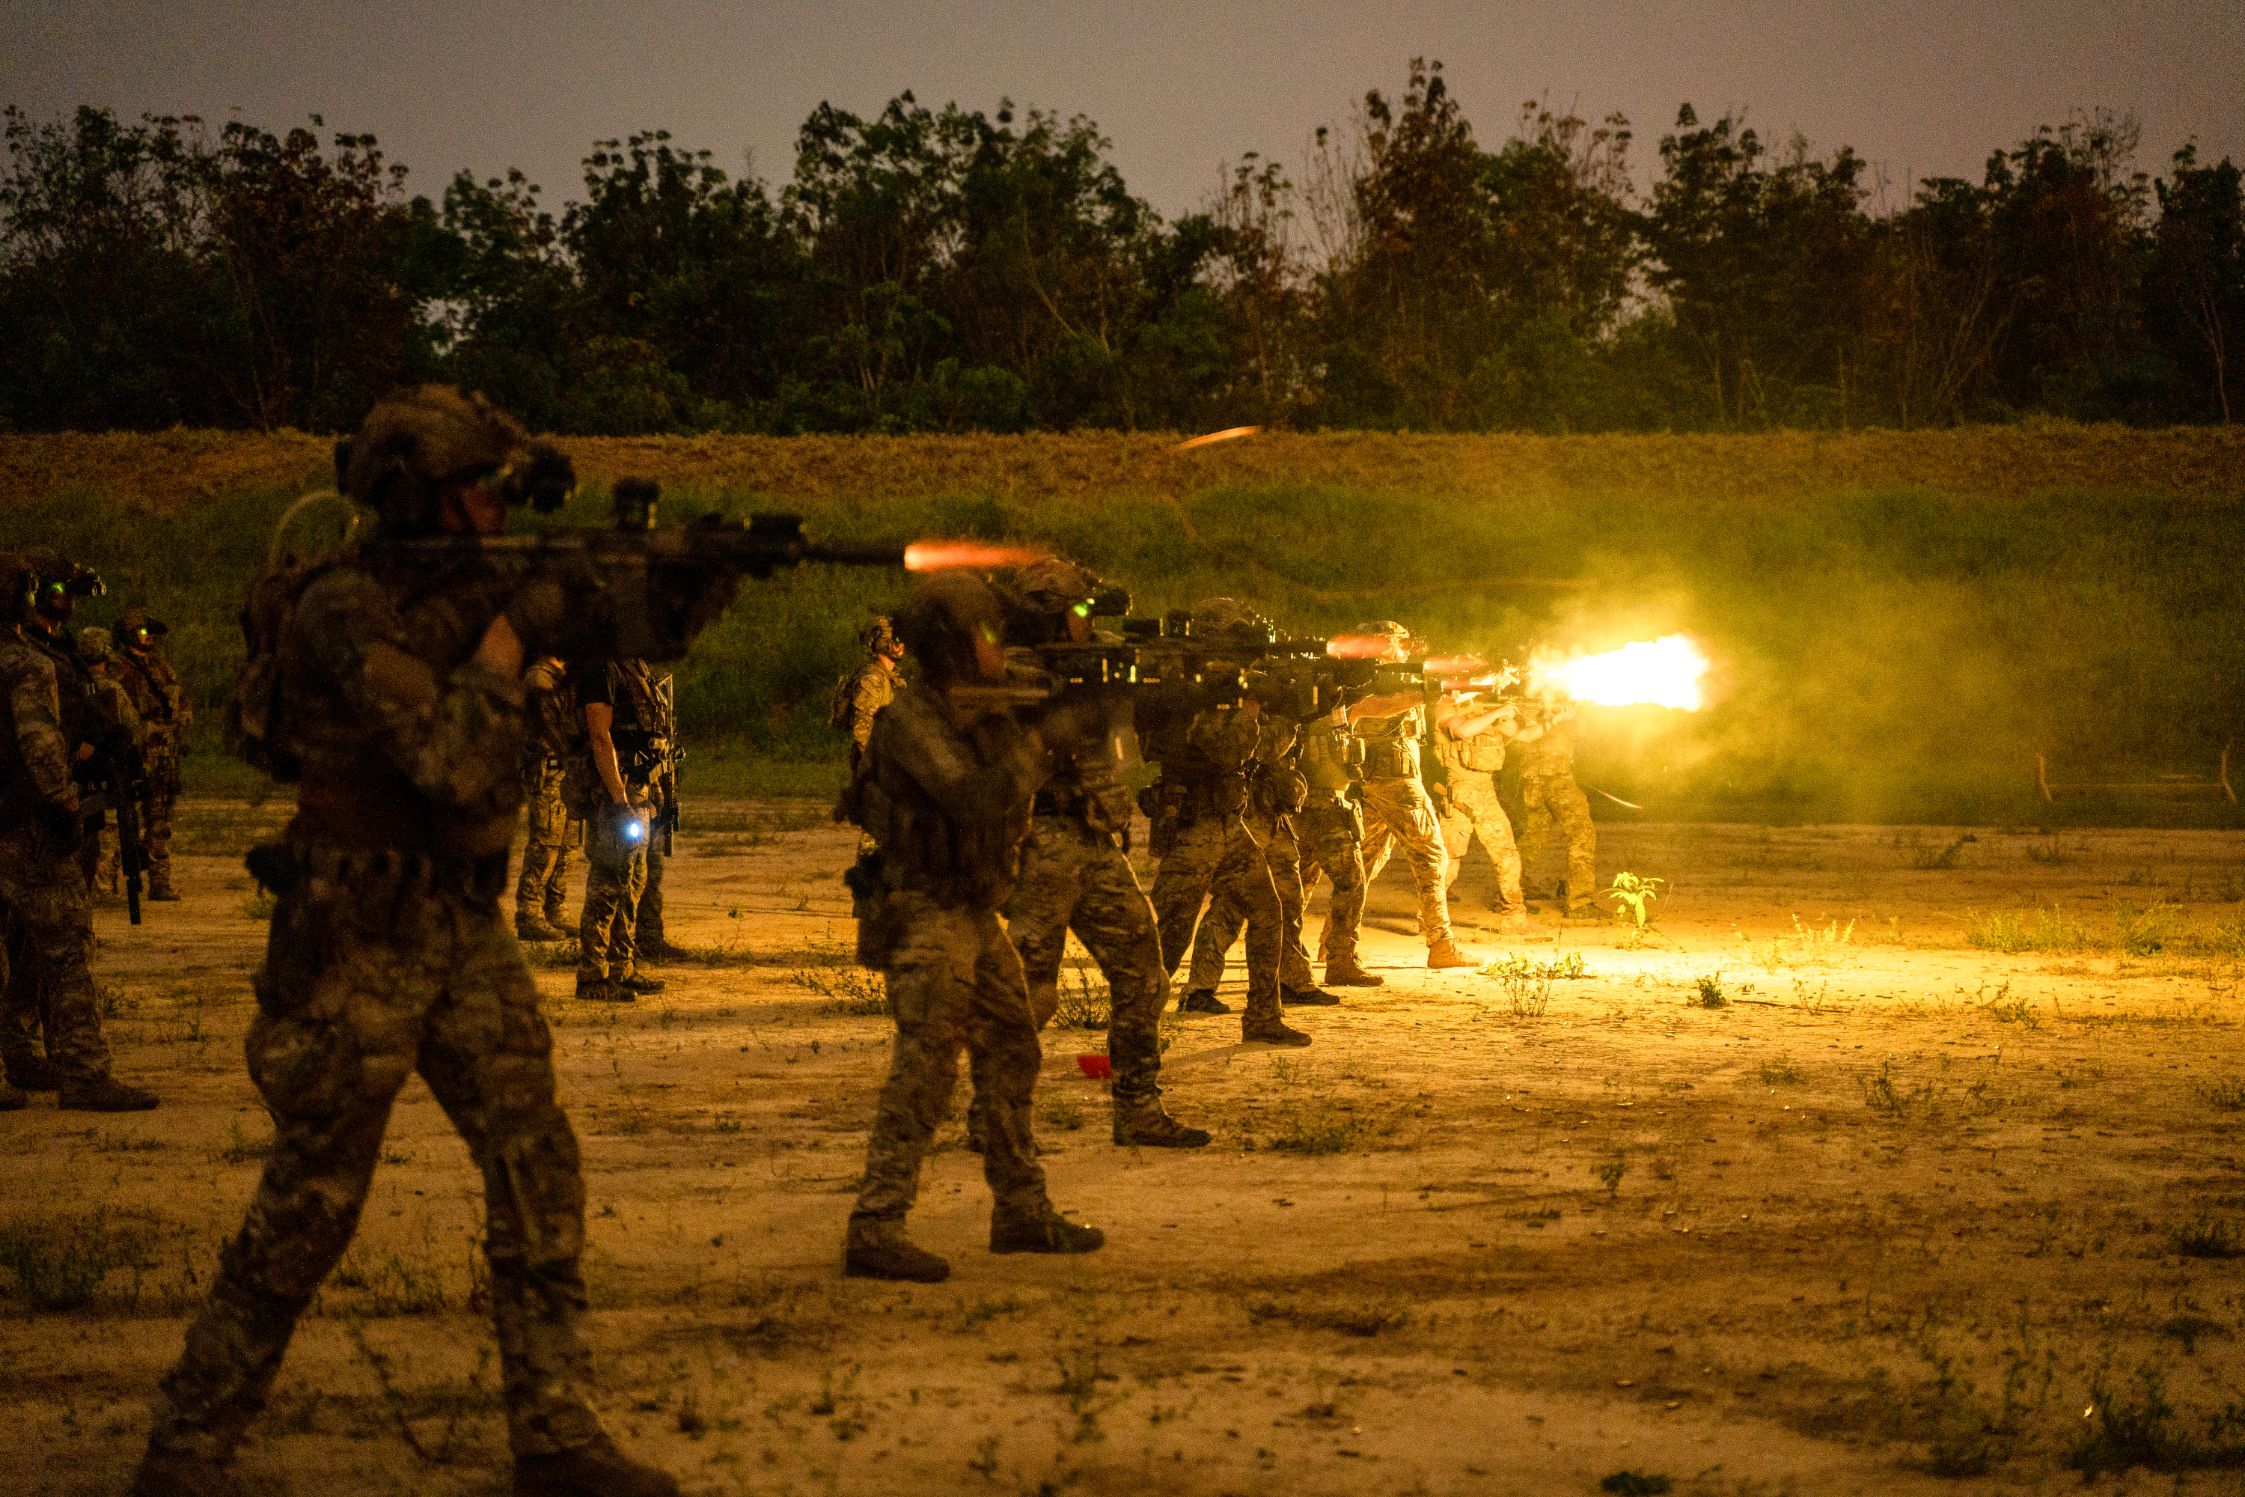 Special Forces Soldiers from Canada, Netherlands, France and the U.S. take part in night shooting at a 400m training range during Flintlock near Abidjan, Côte d'Ivoire, March 4, 2023. Flintlock is U.S. Africa Command’s premier and largest annual special operations exercise that strengthens key partner nations throughout Africa, in partnership with other international special operations forces. (U.S. Air Force photo by Tech. Sgt. Katelynn Moeller)